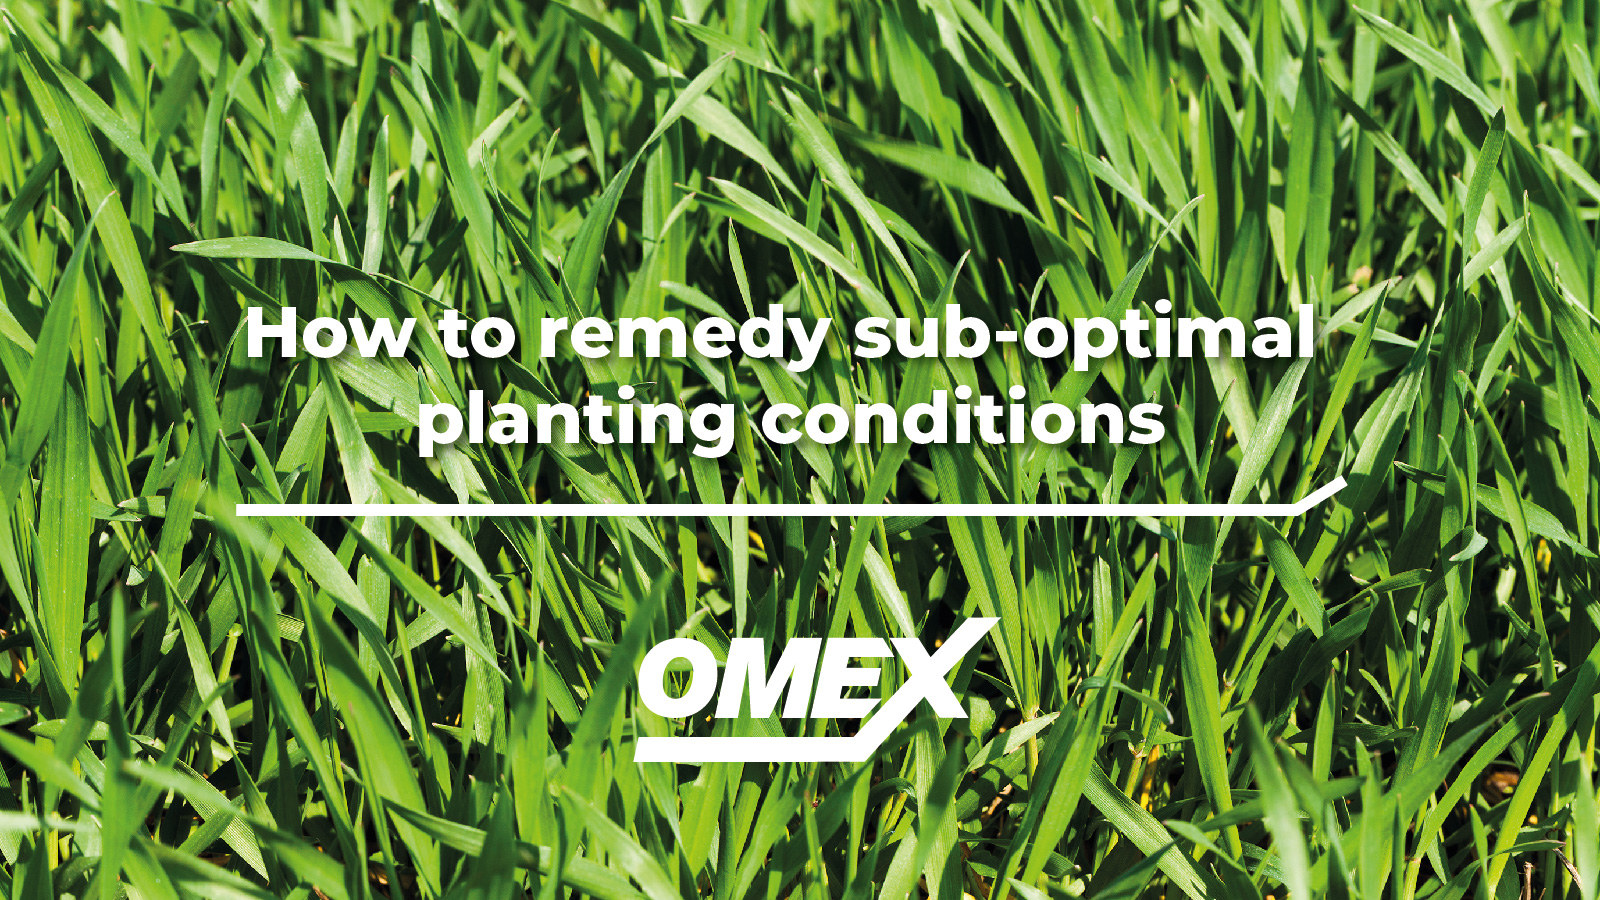 How to remedy sub-optimal planting conditions